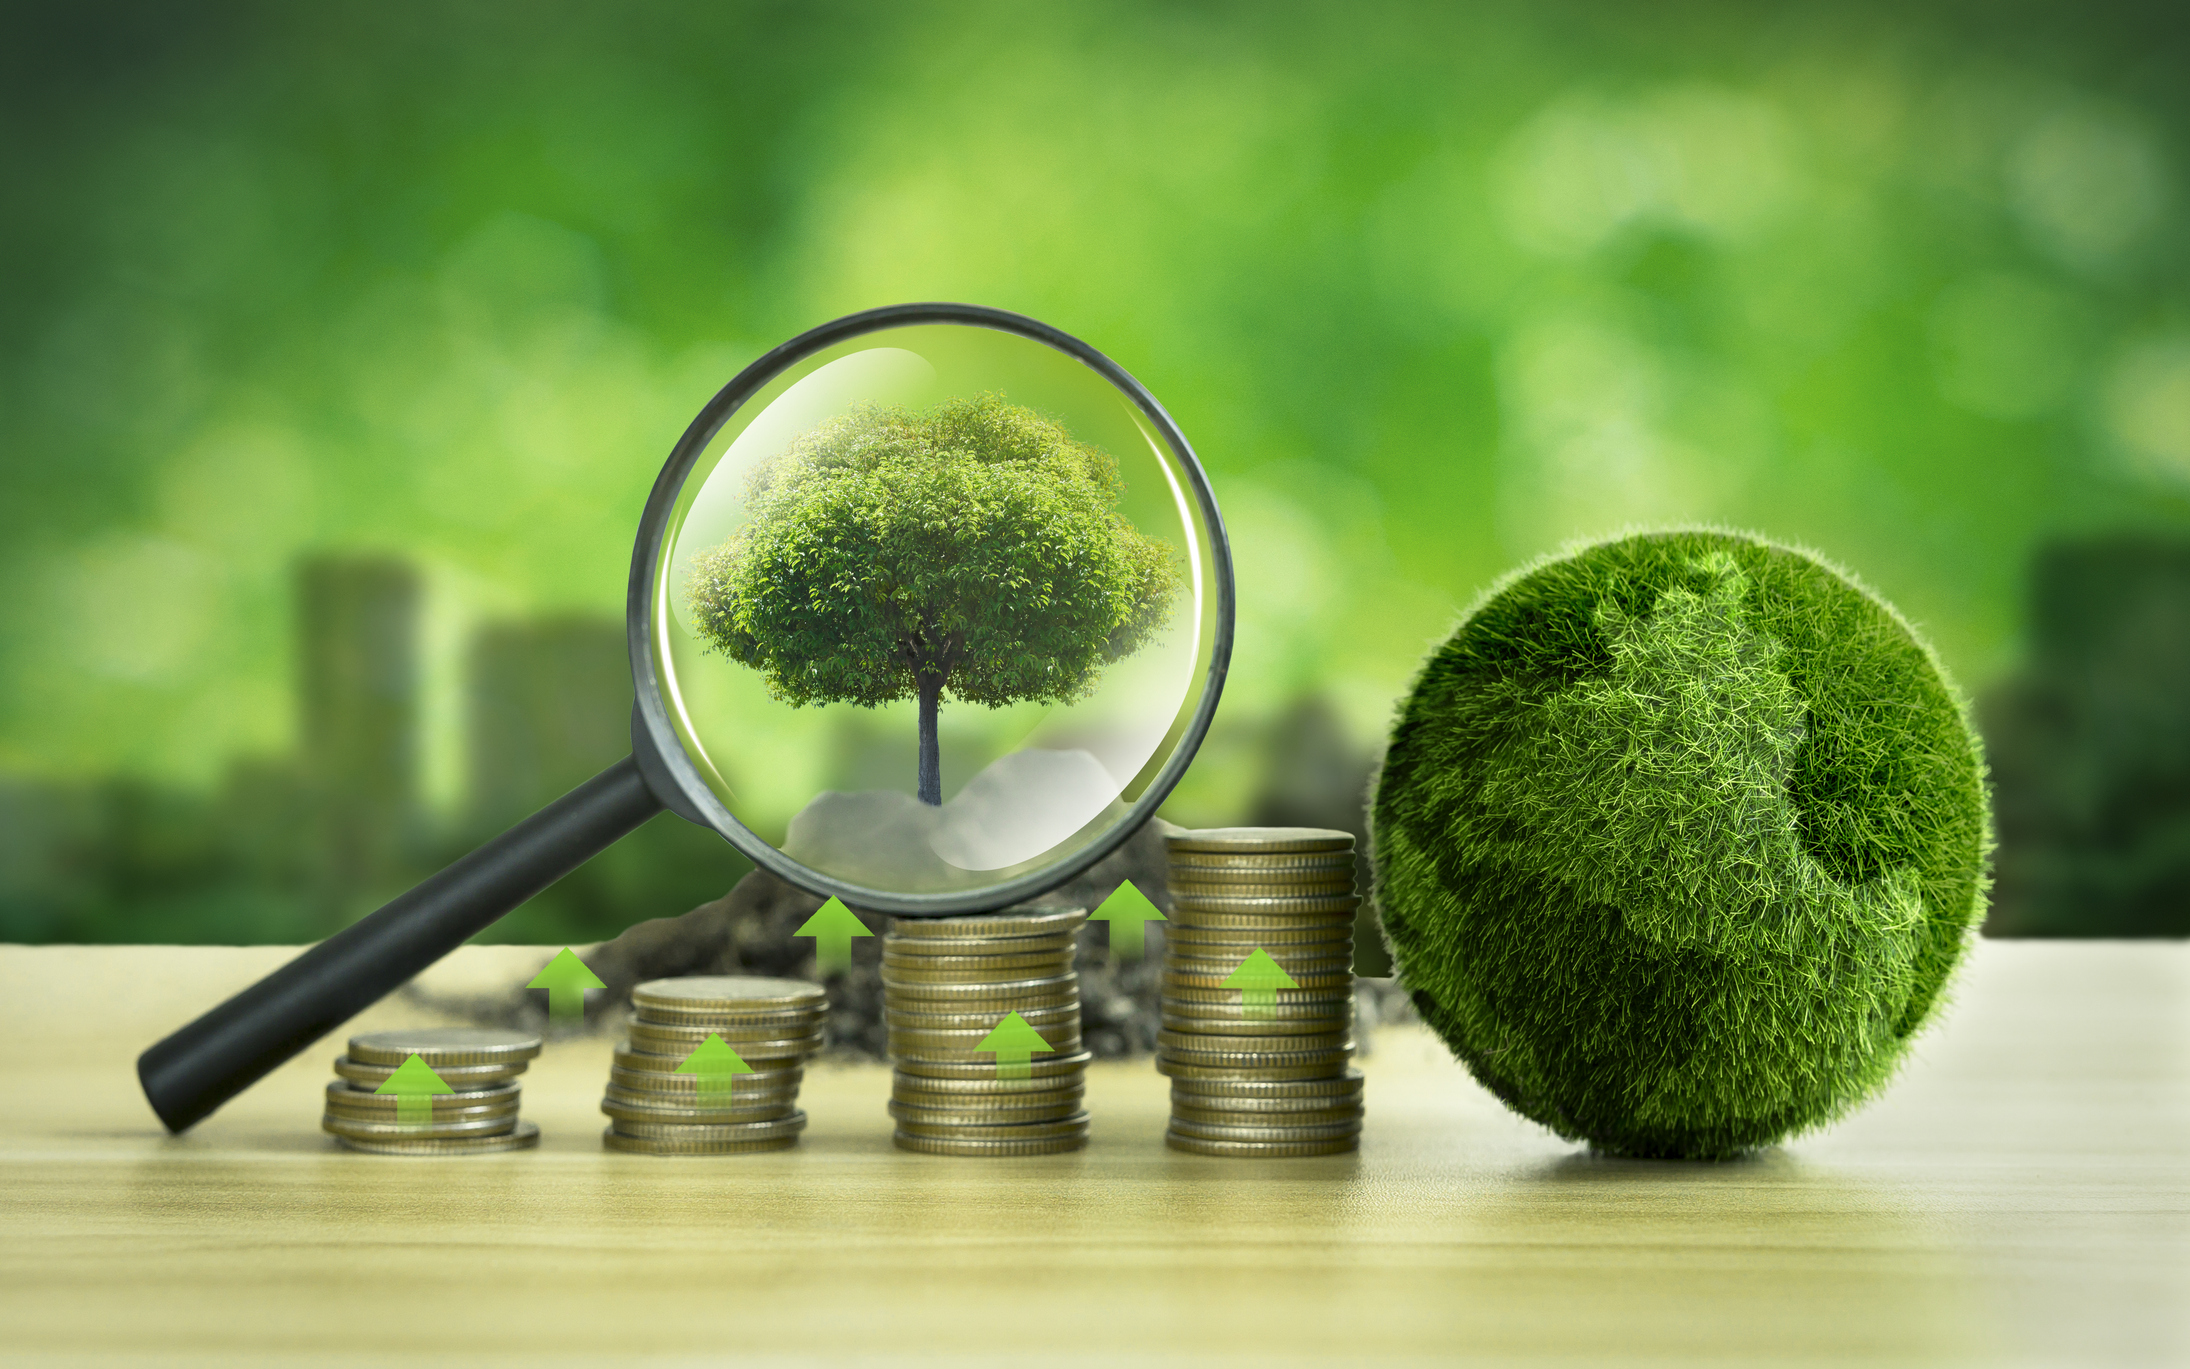 ESG is becoming increasingly material, finds research